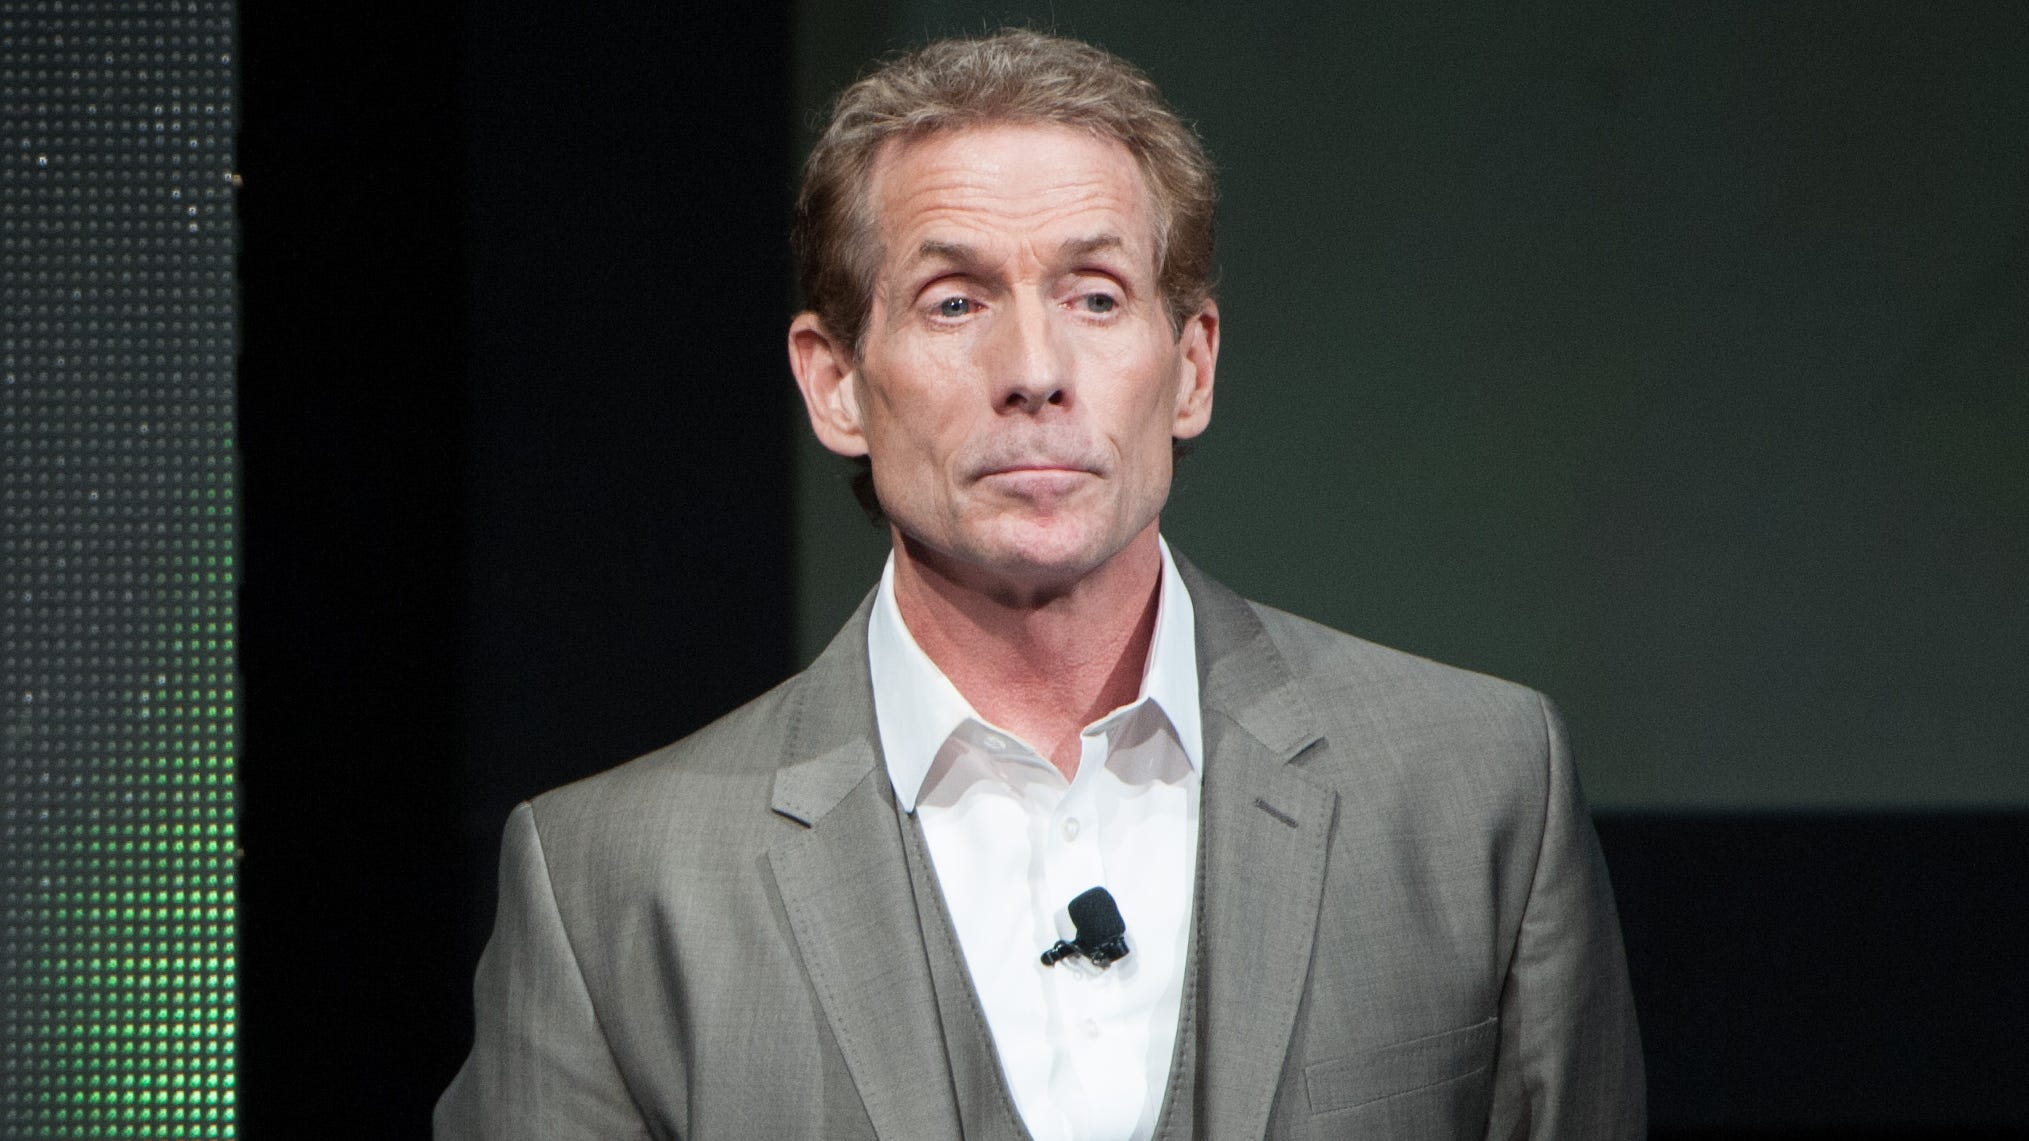 Skip Bayless isn't to blame for huge contract, blame hot take culture